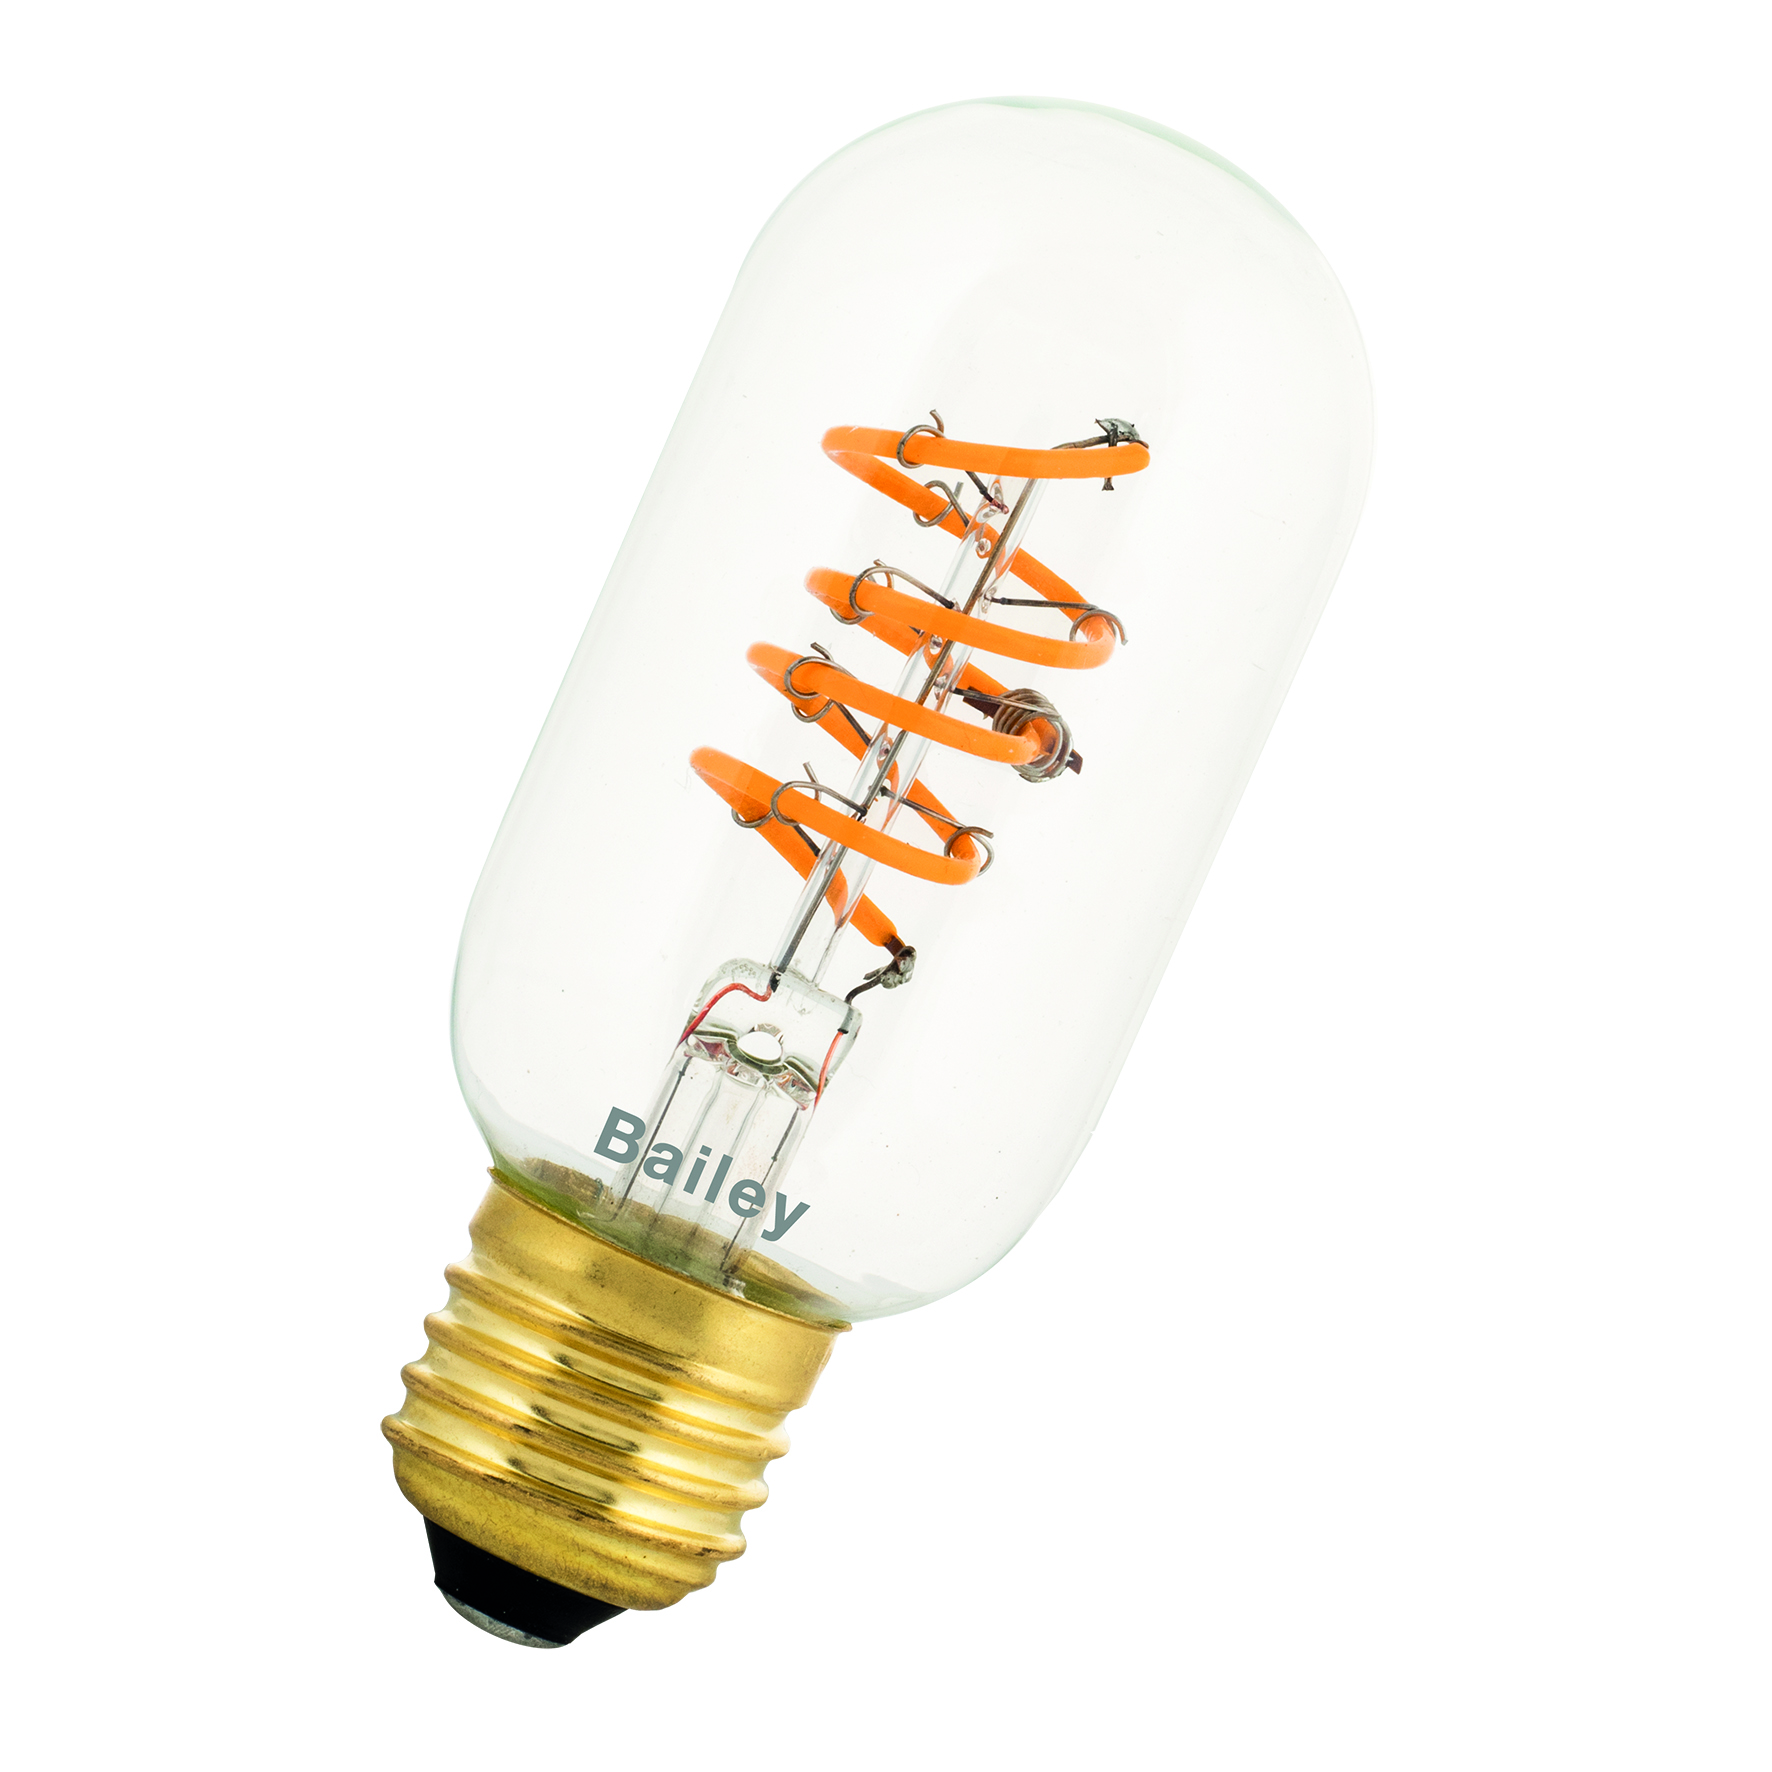 SPIRALED Marion T45 E27 DIM 3.2W 190lm 922 Clear